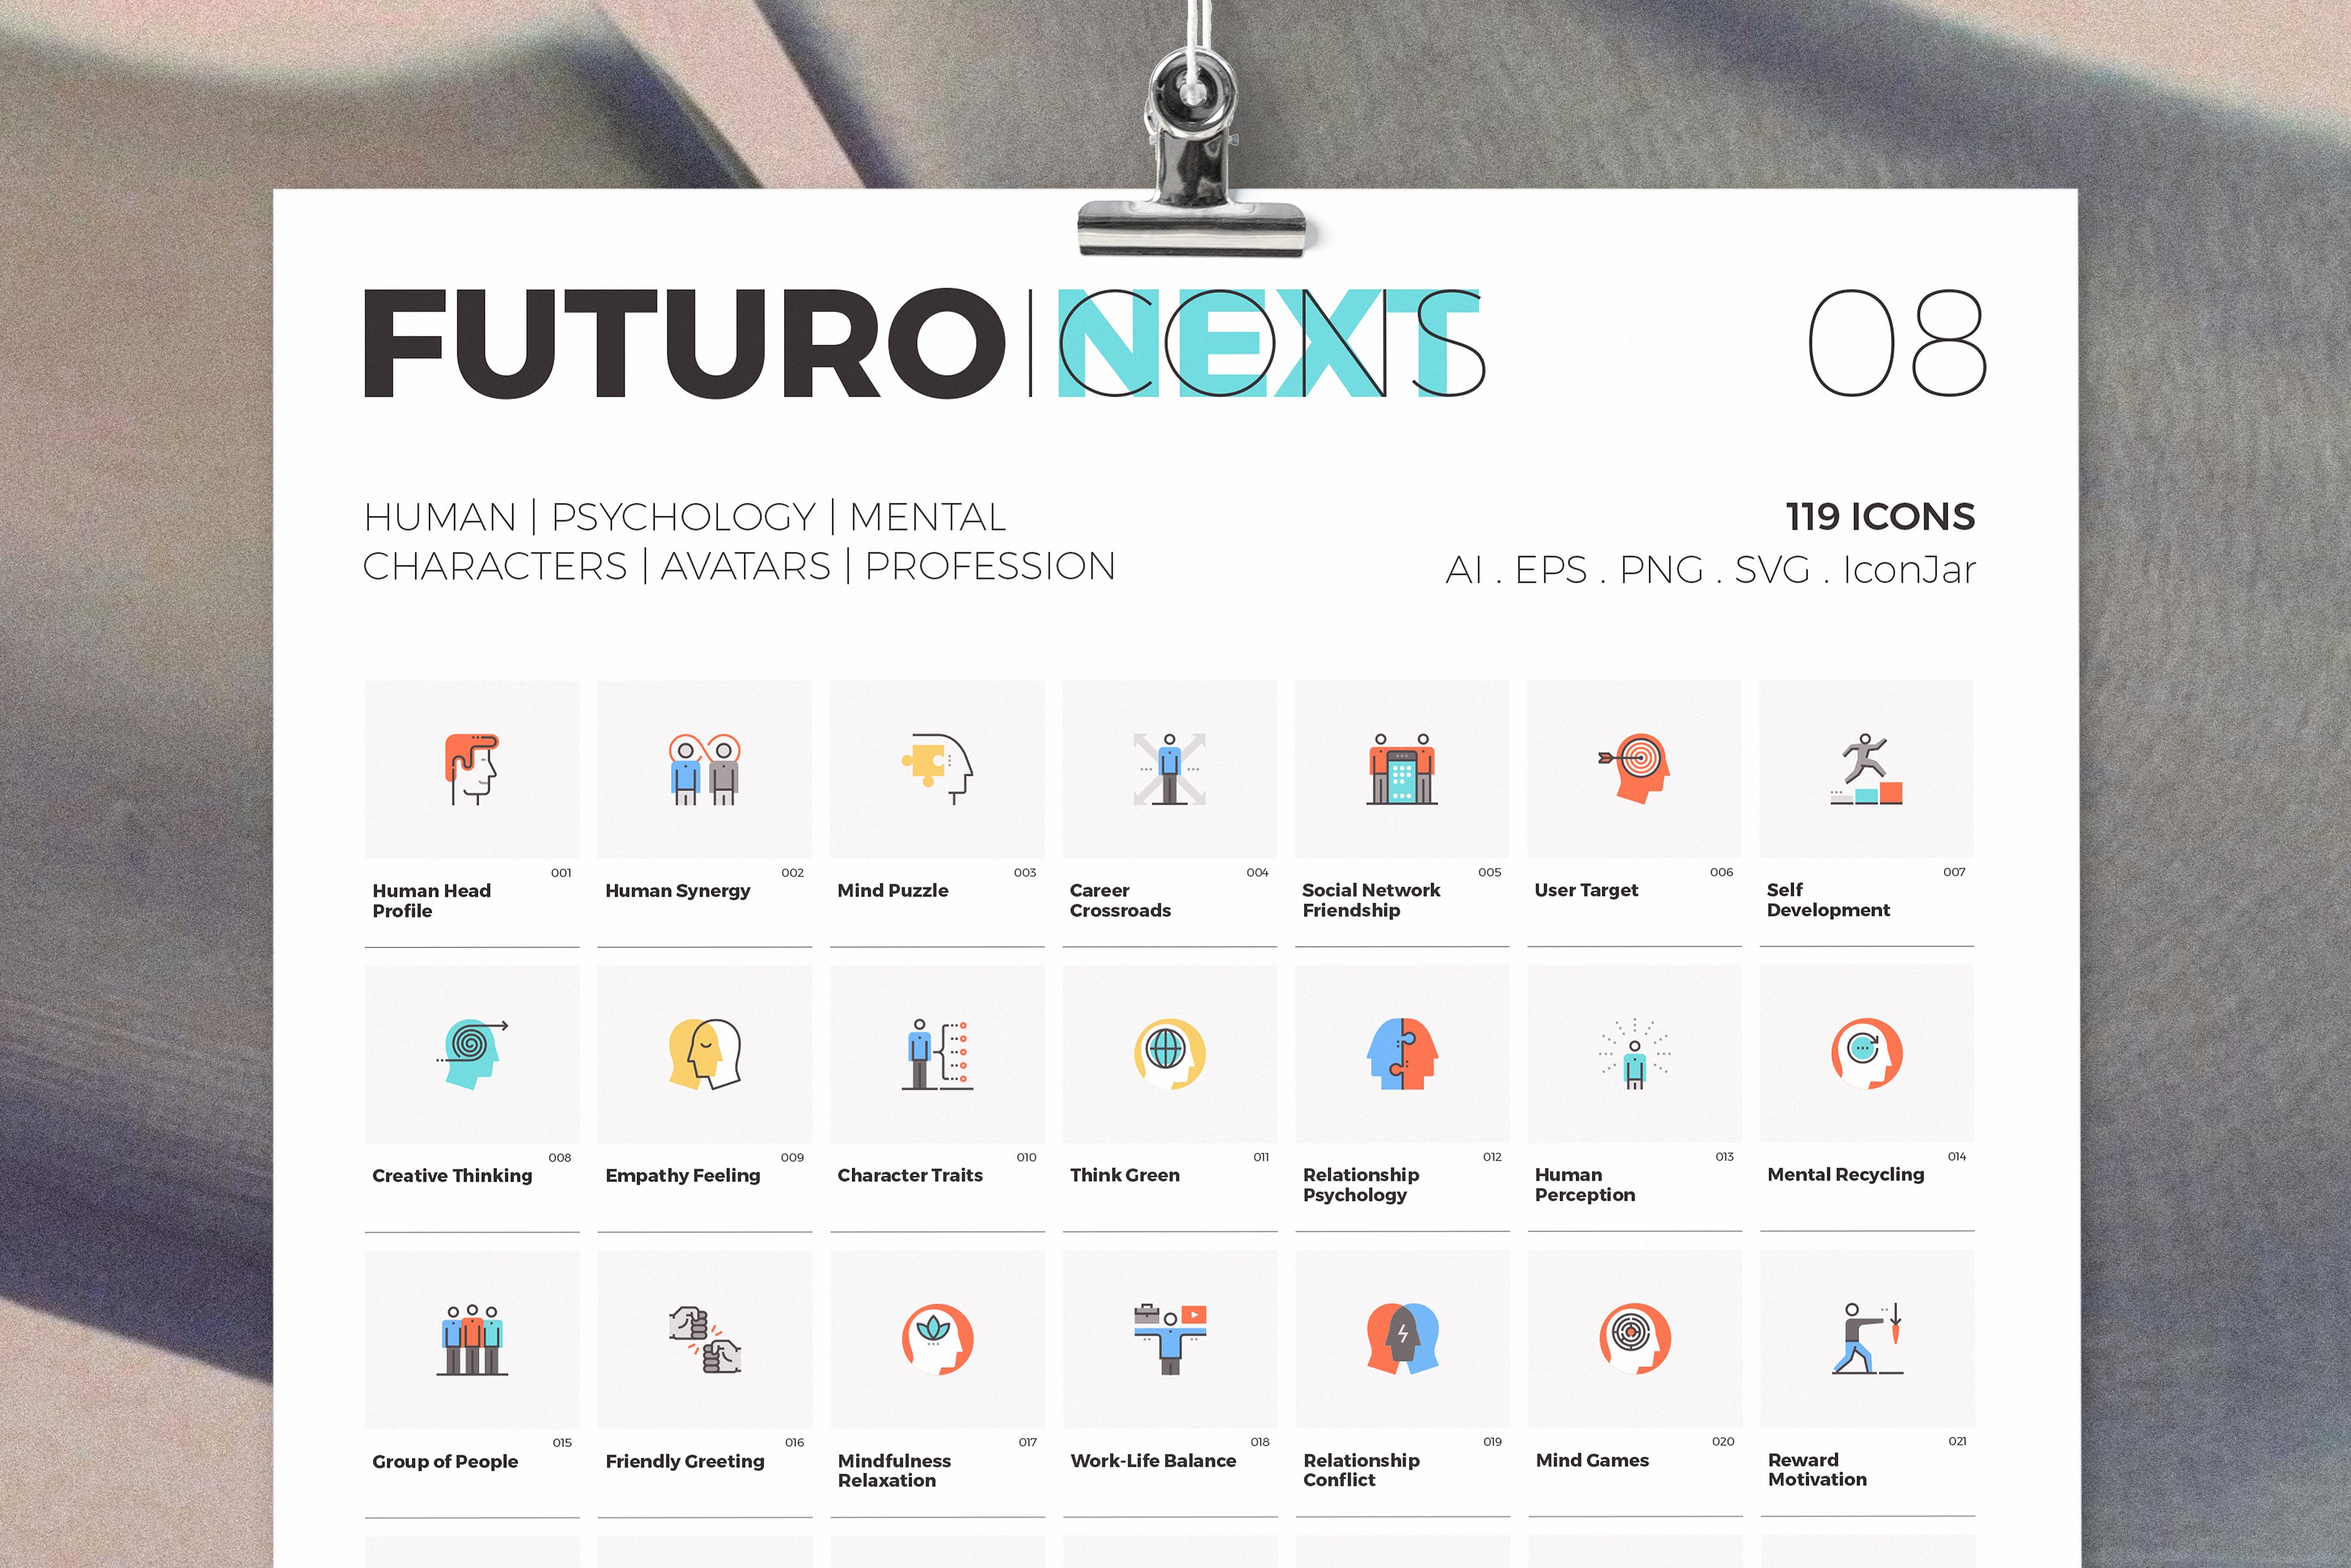 Futuro Next Icons / Human Pack cover image.